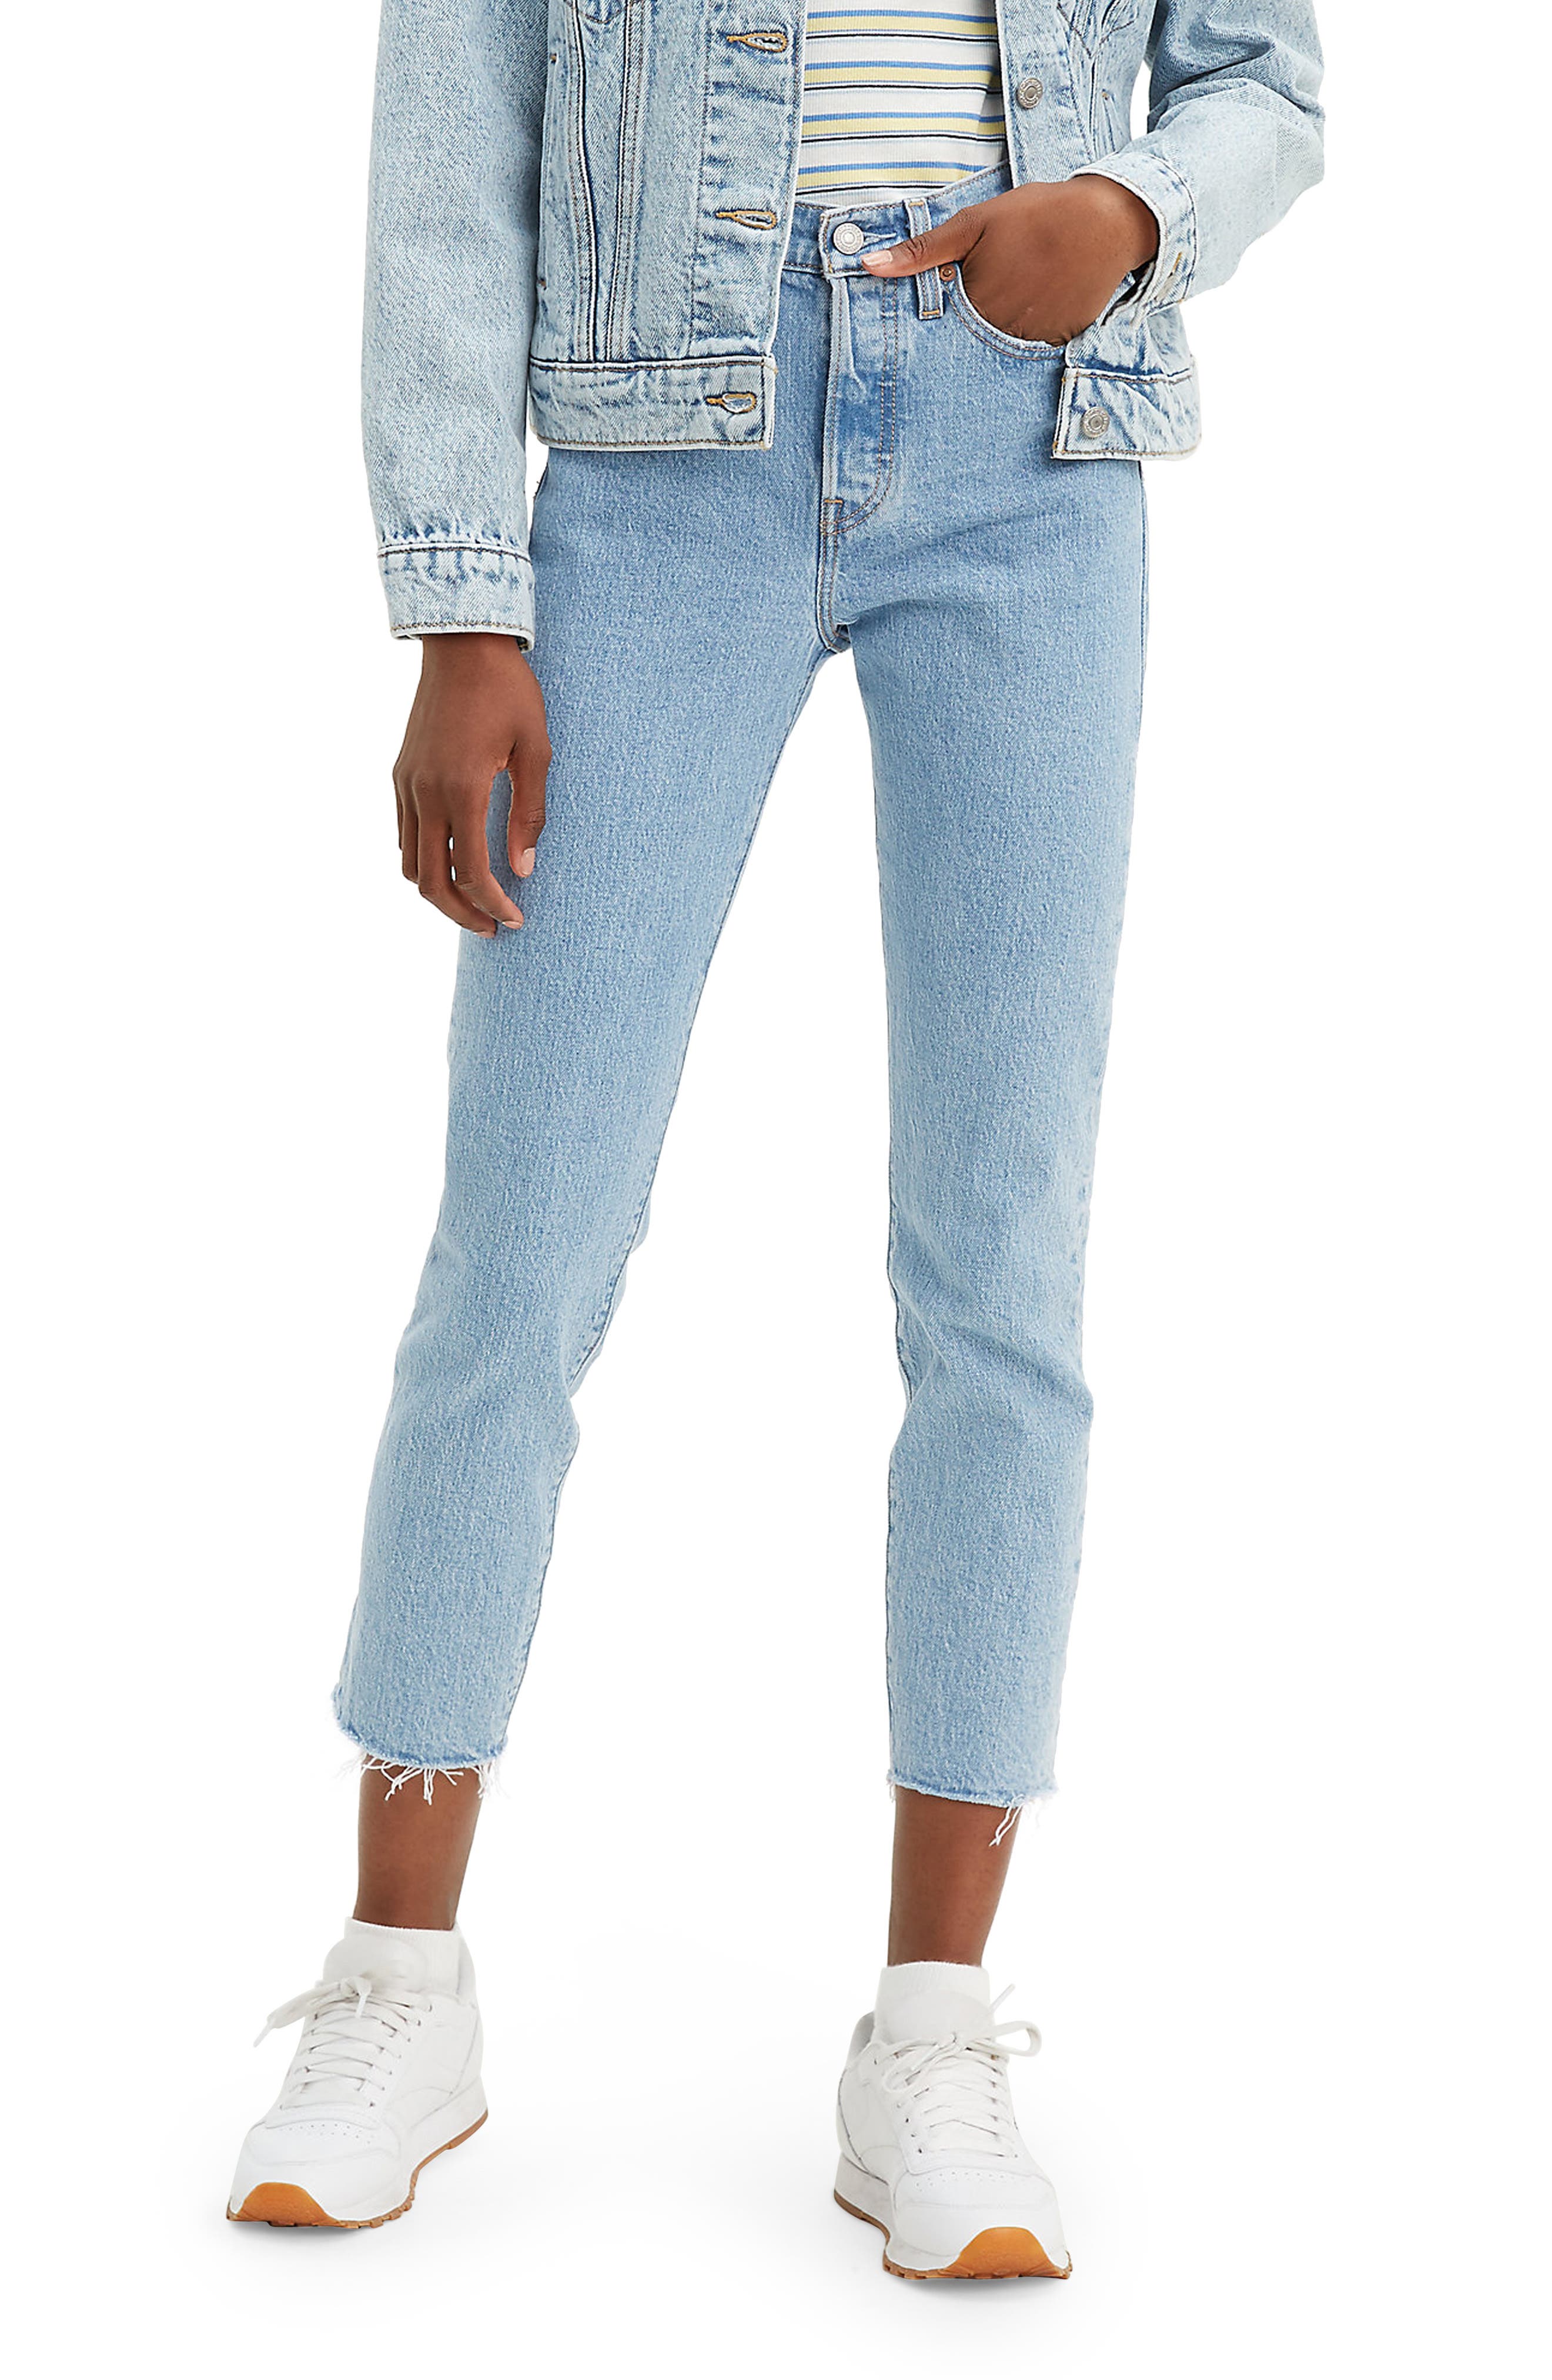 relaxed fit jeans canada